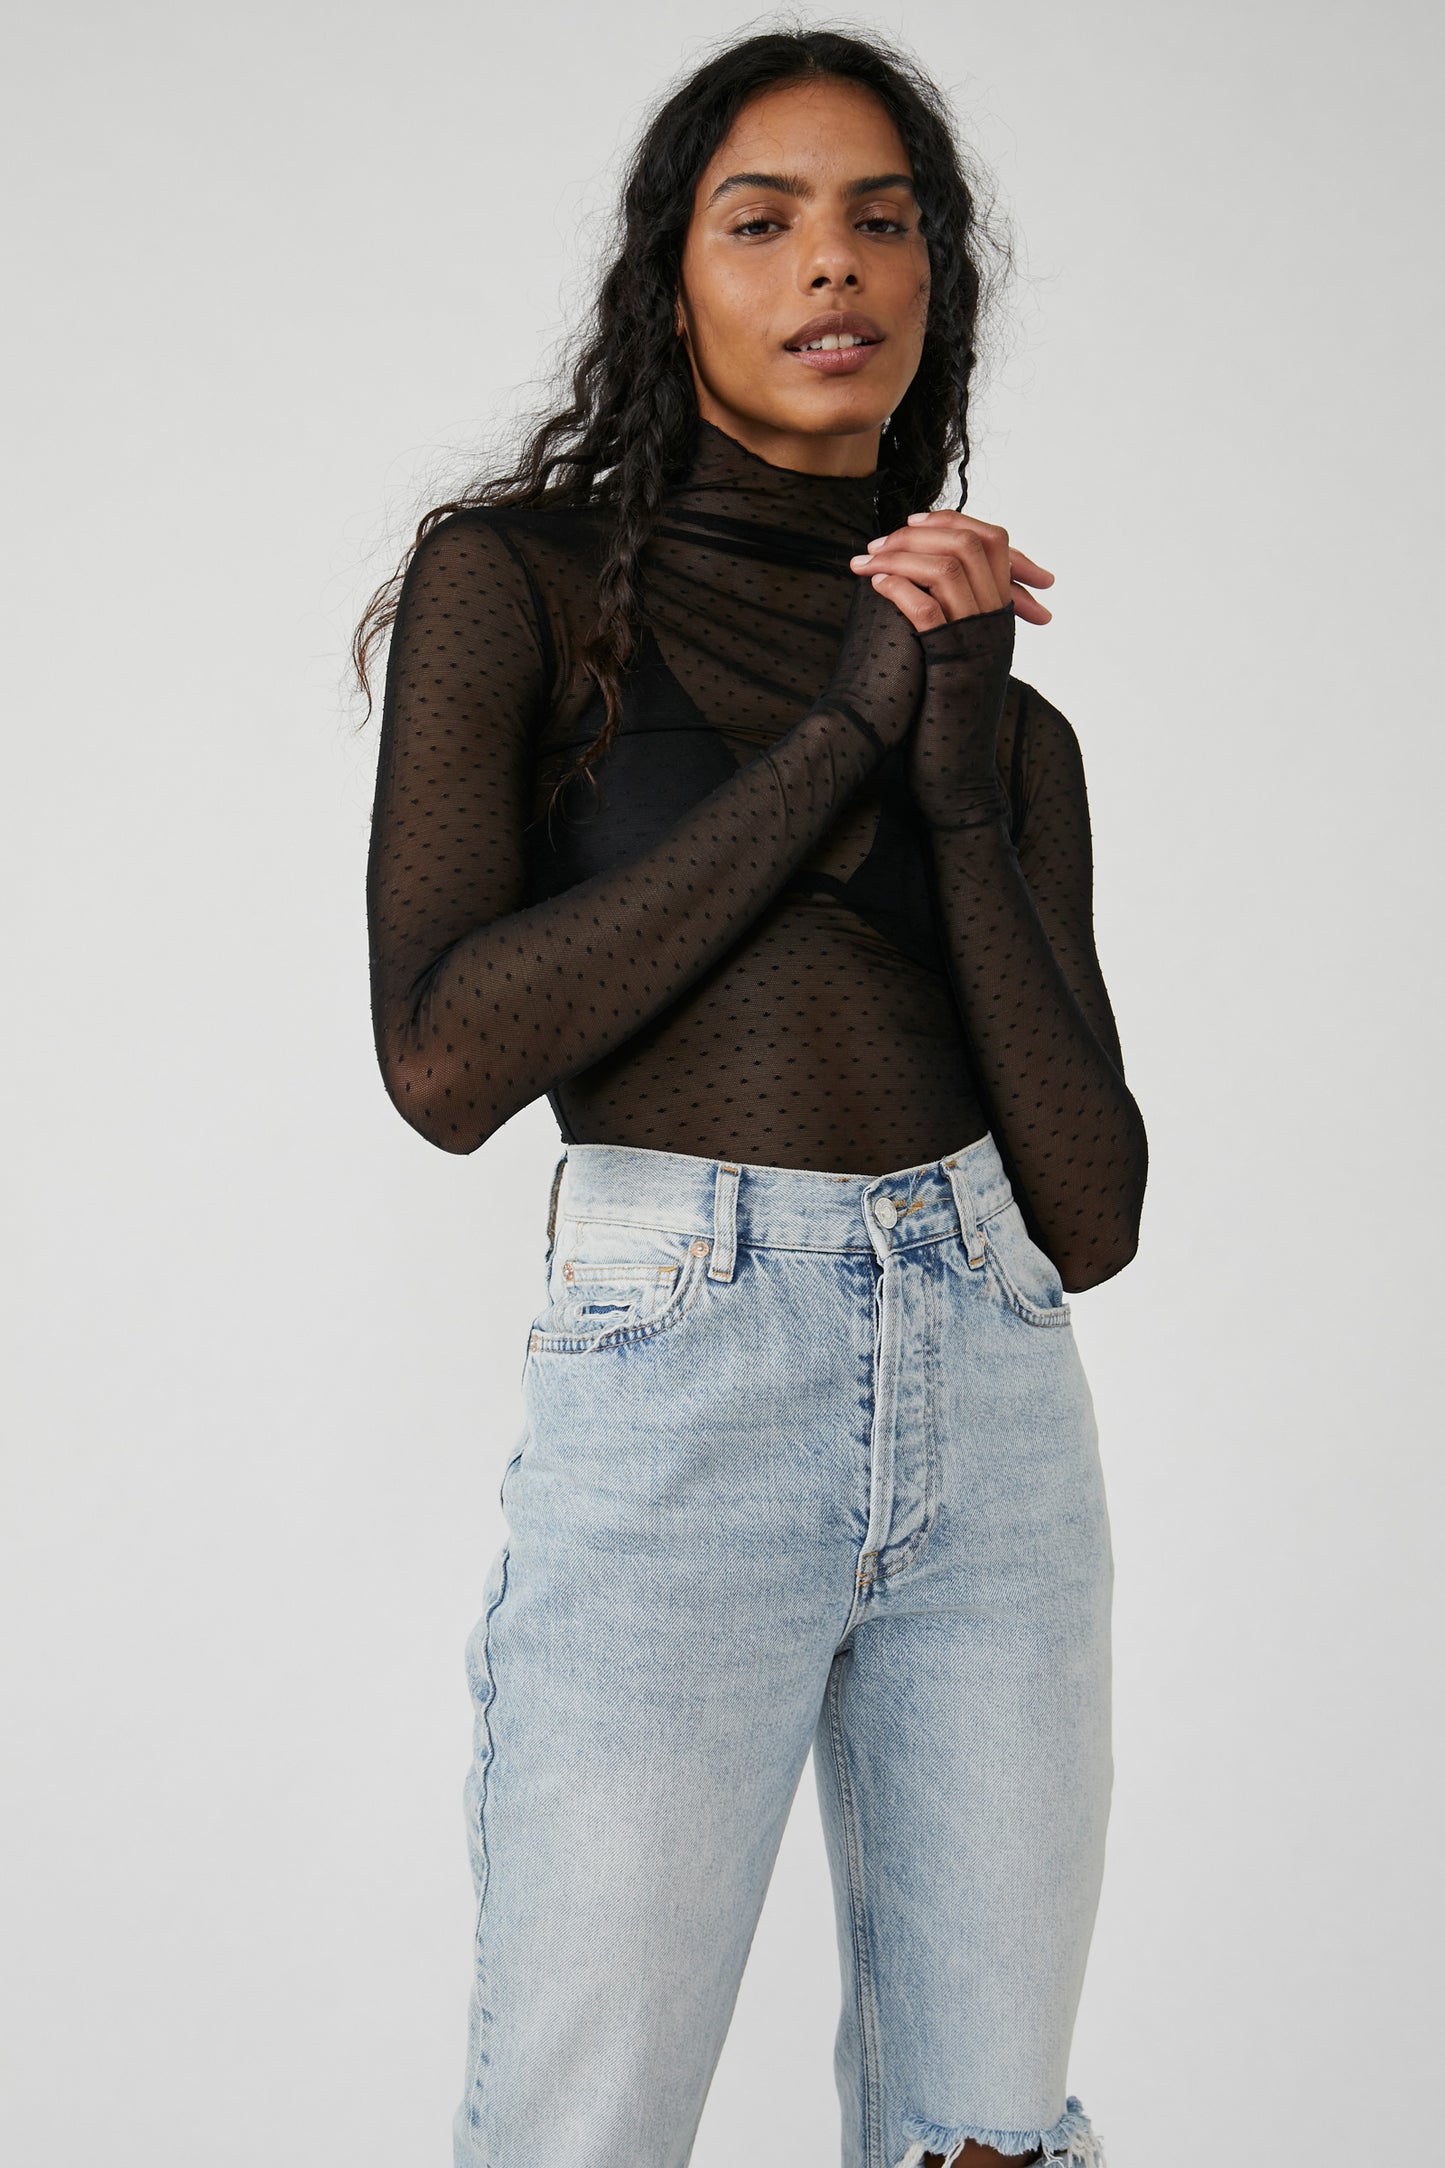 On the Dot Layering Top